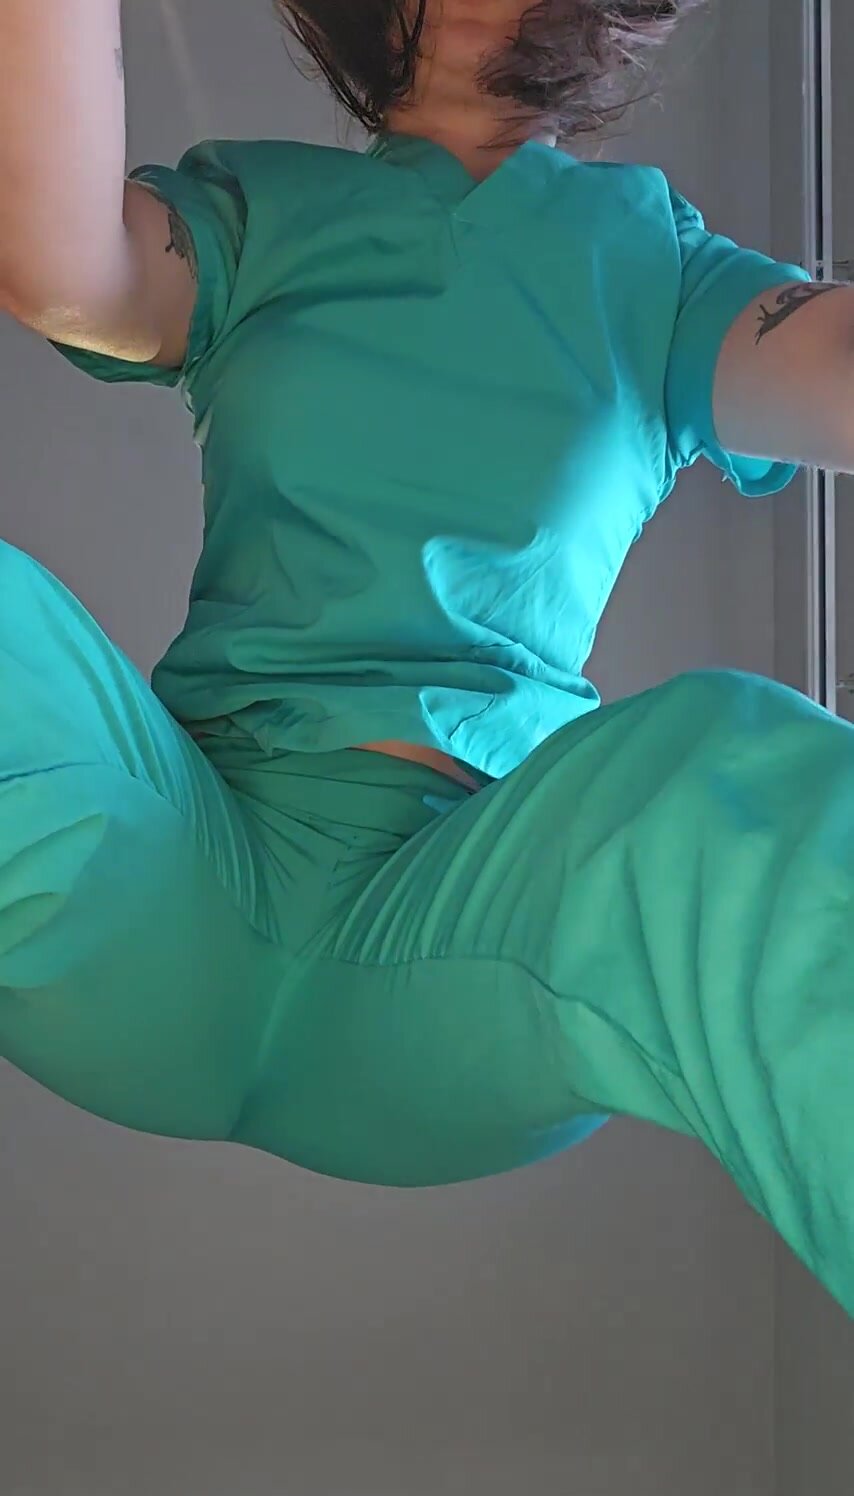 lick my nurse pussy before you fuck me